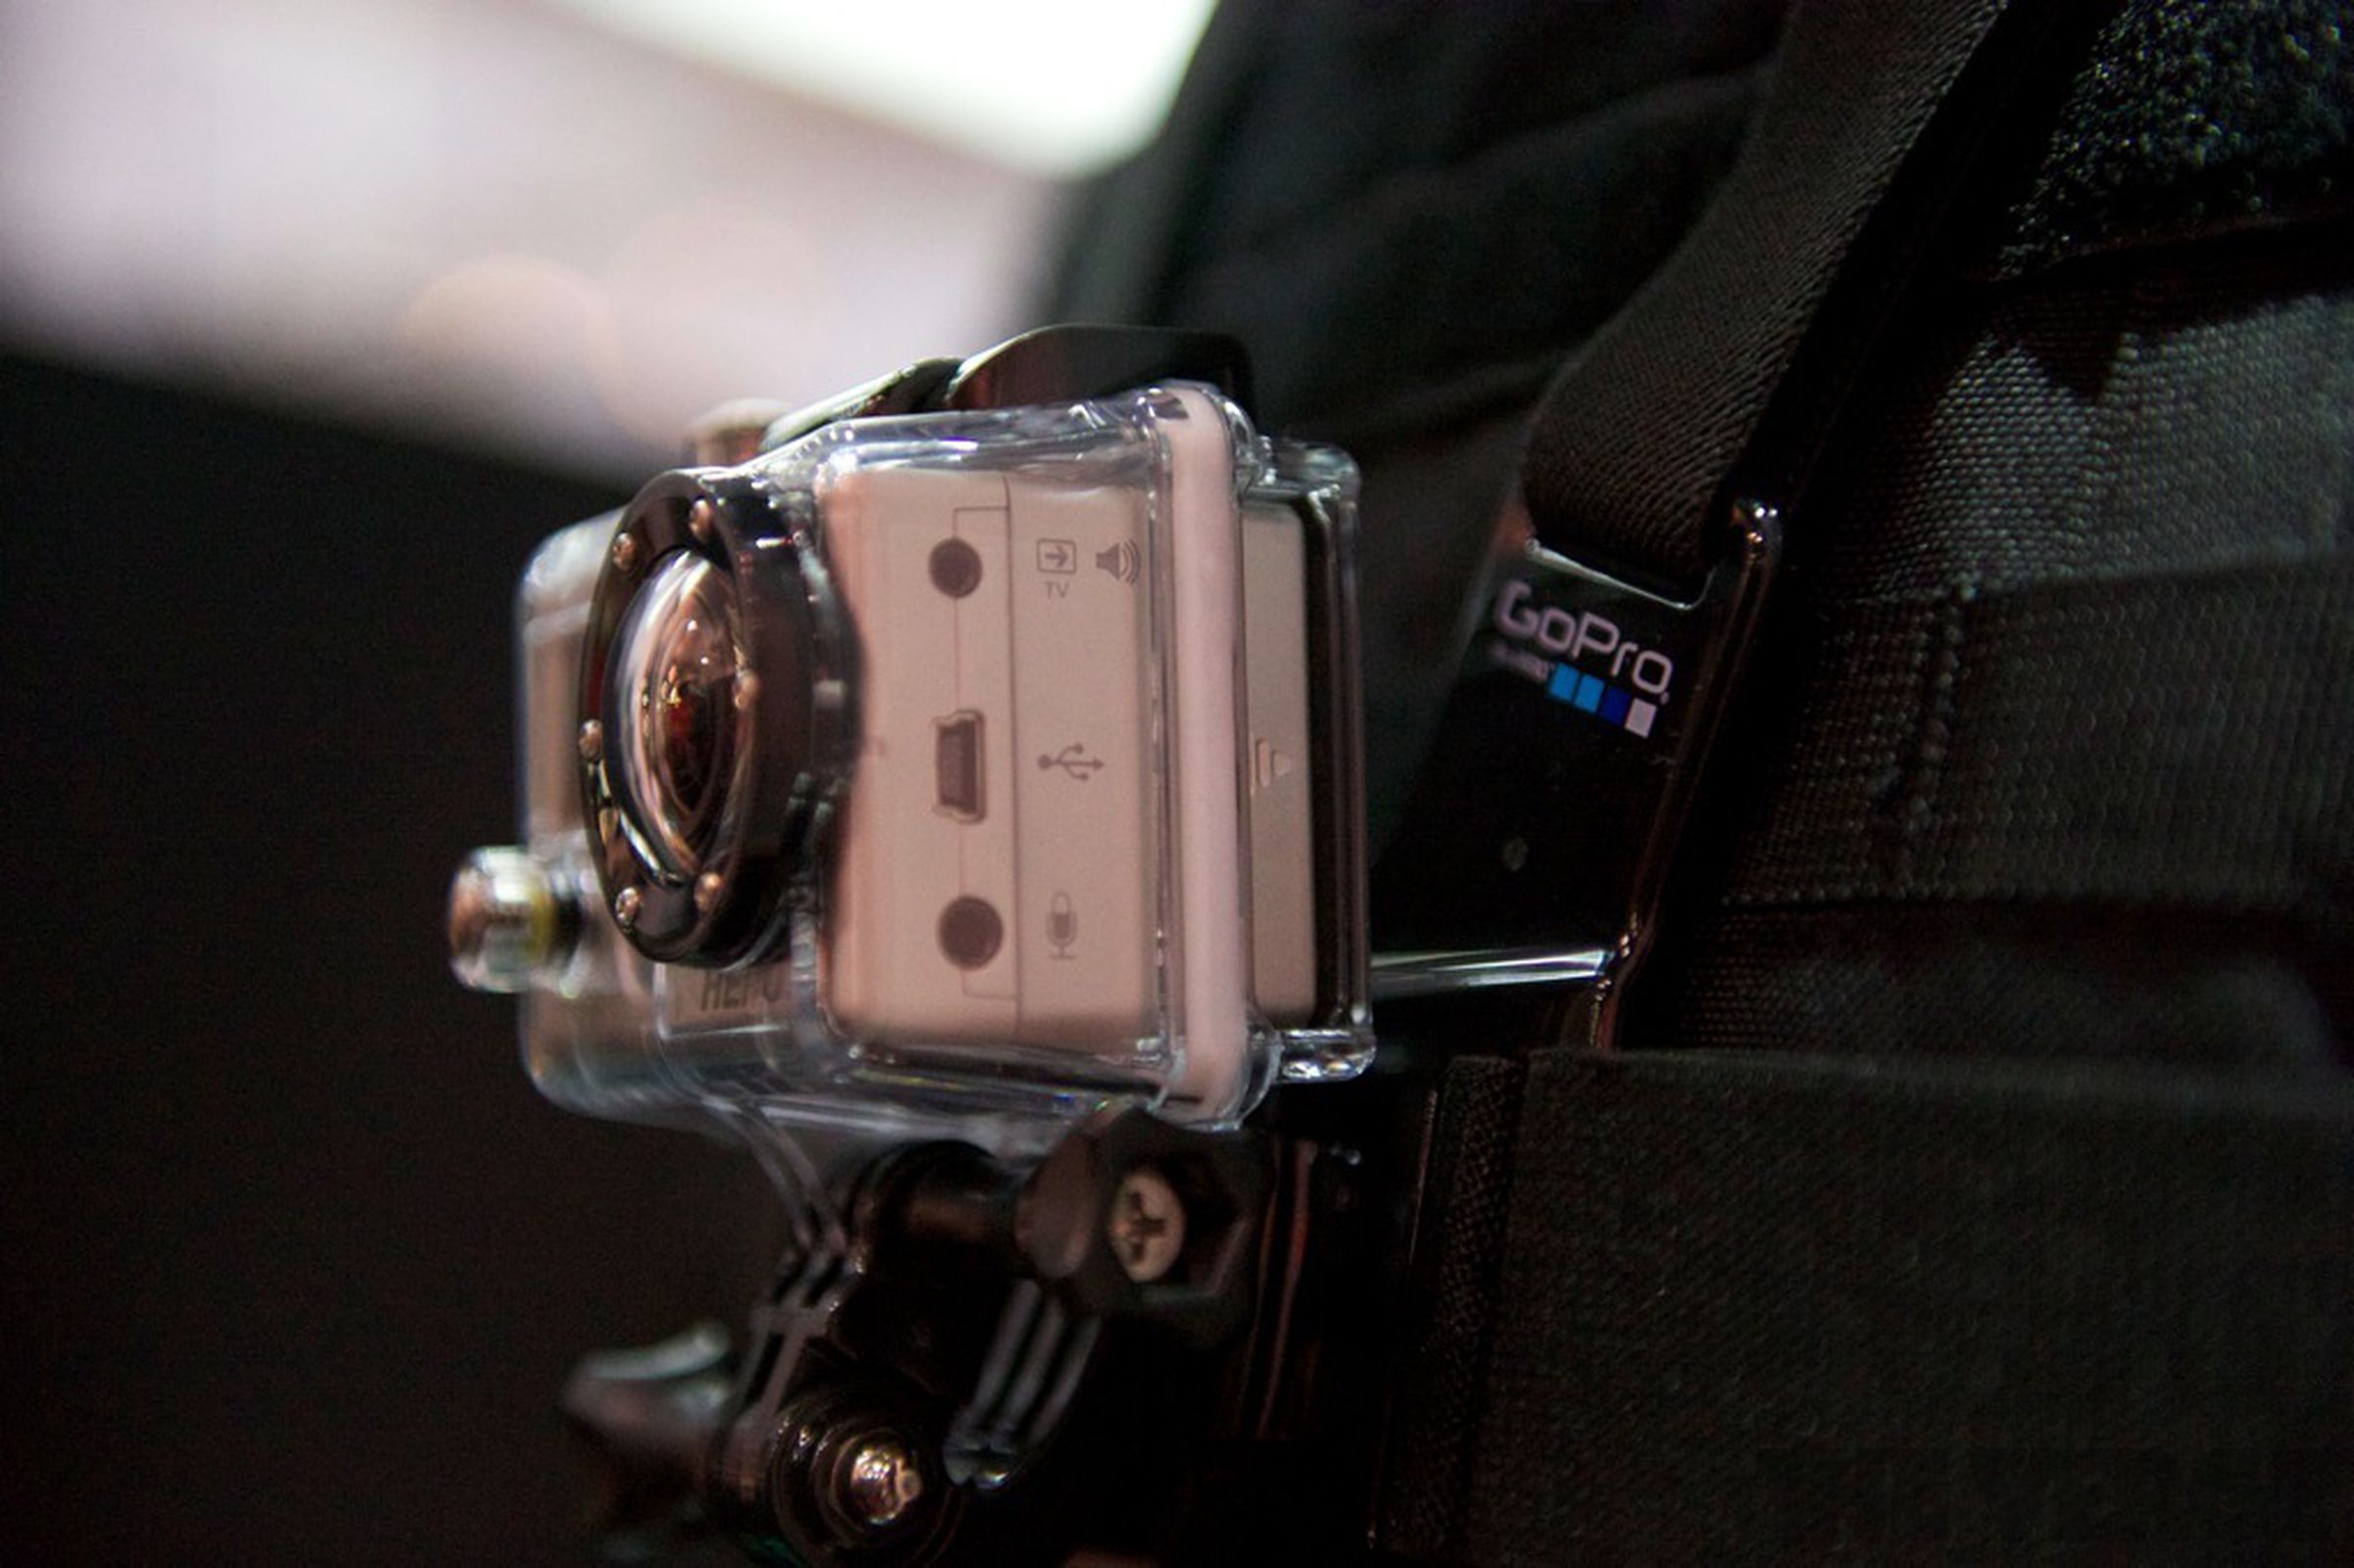 GoPro Wi-Fi BacPac hands-on pictures